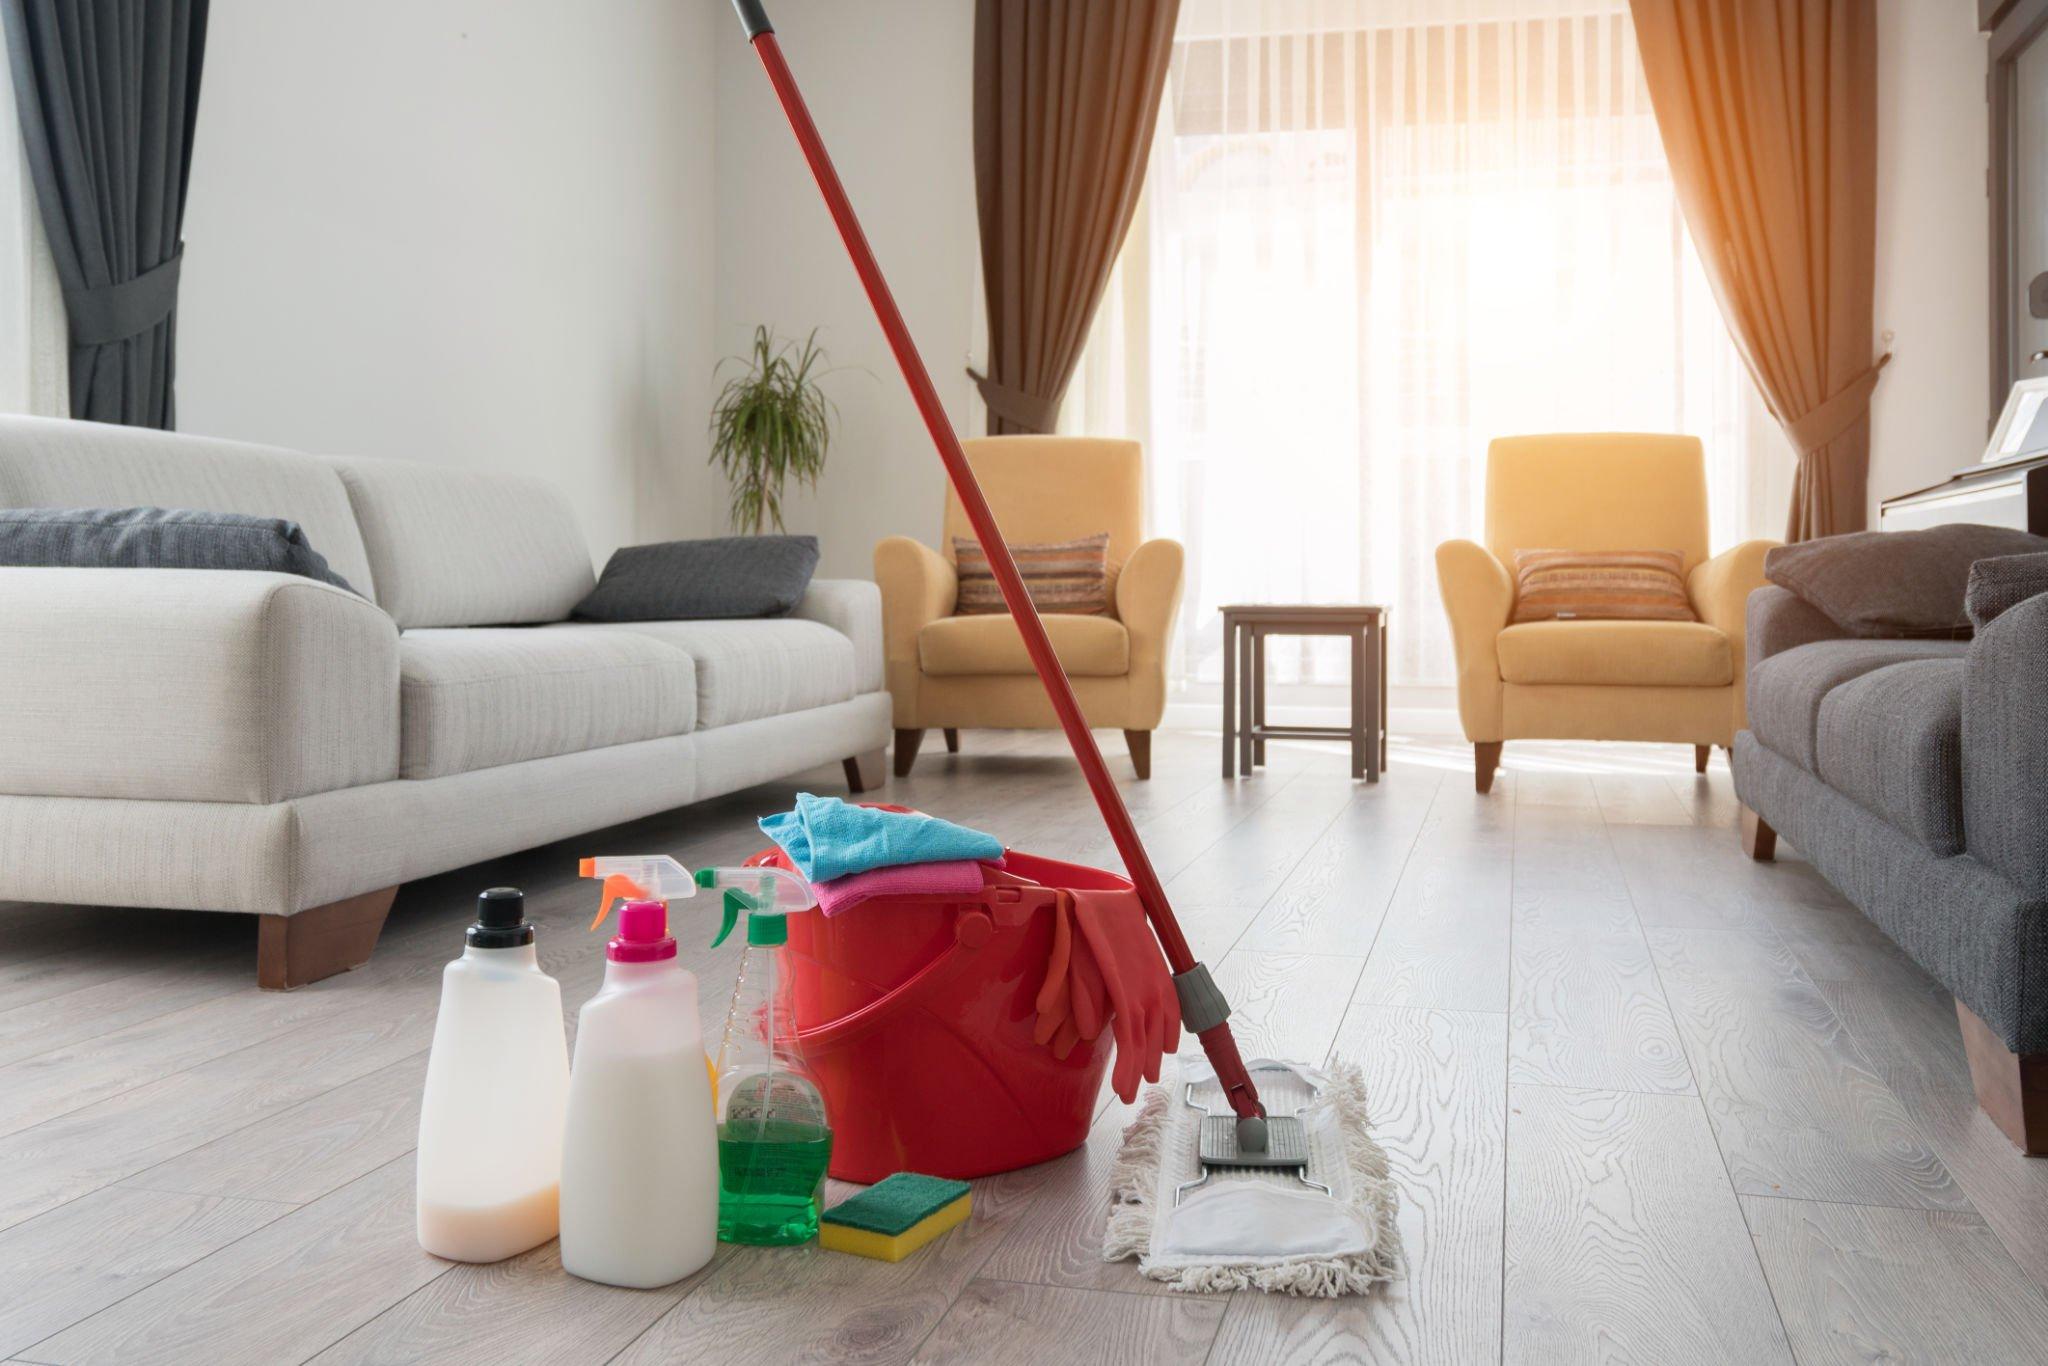 10 Tips to Improve Your House Cleaning